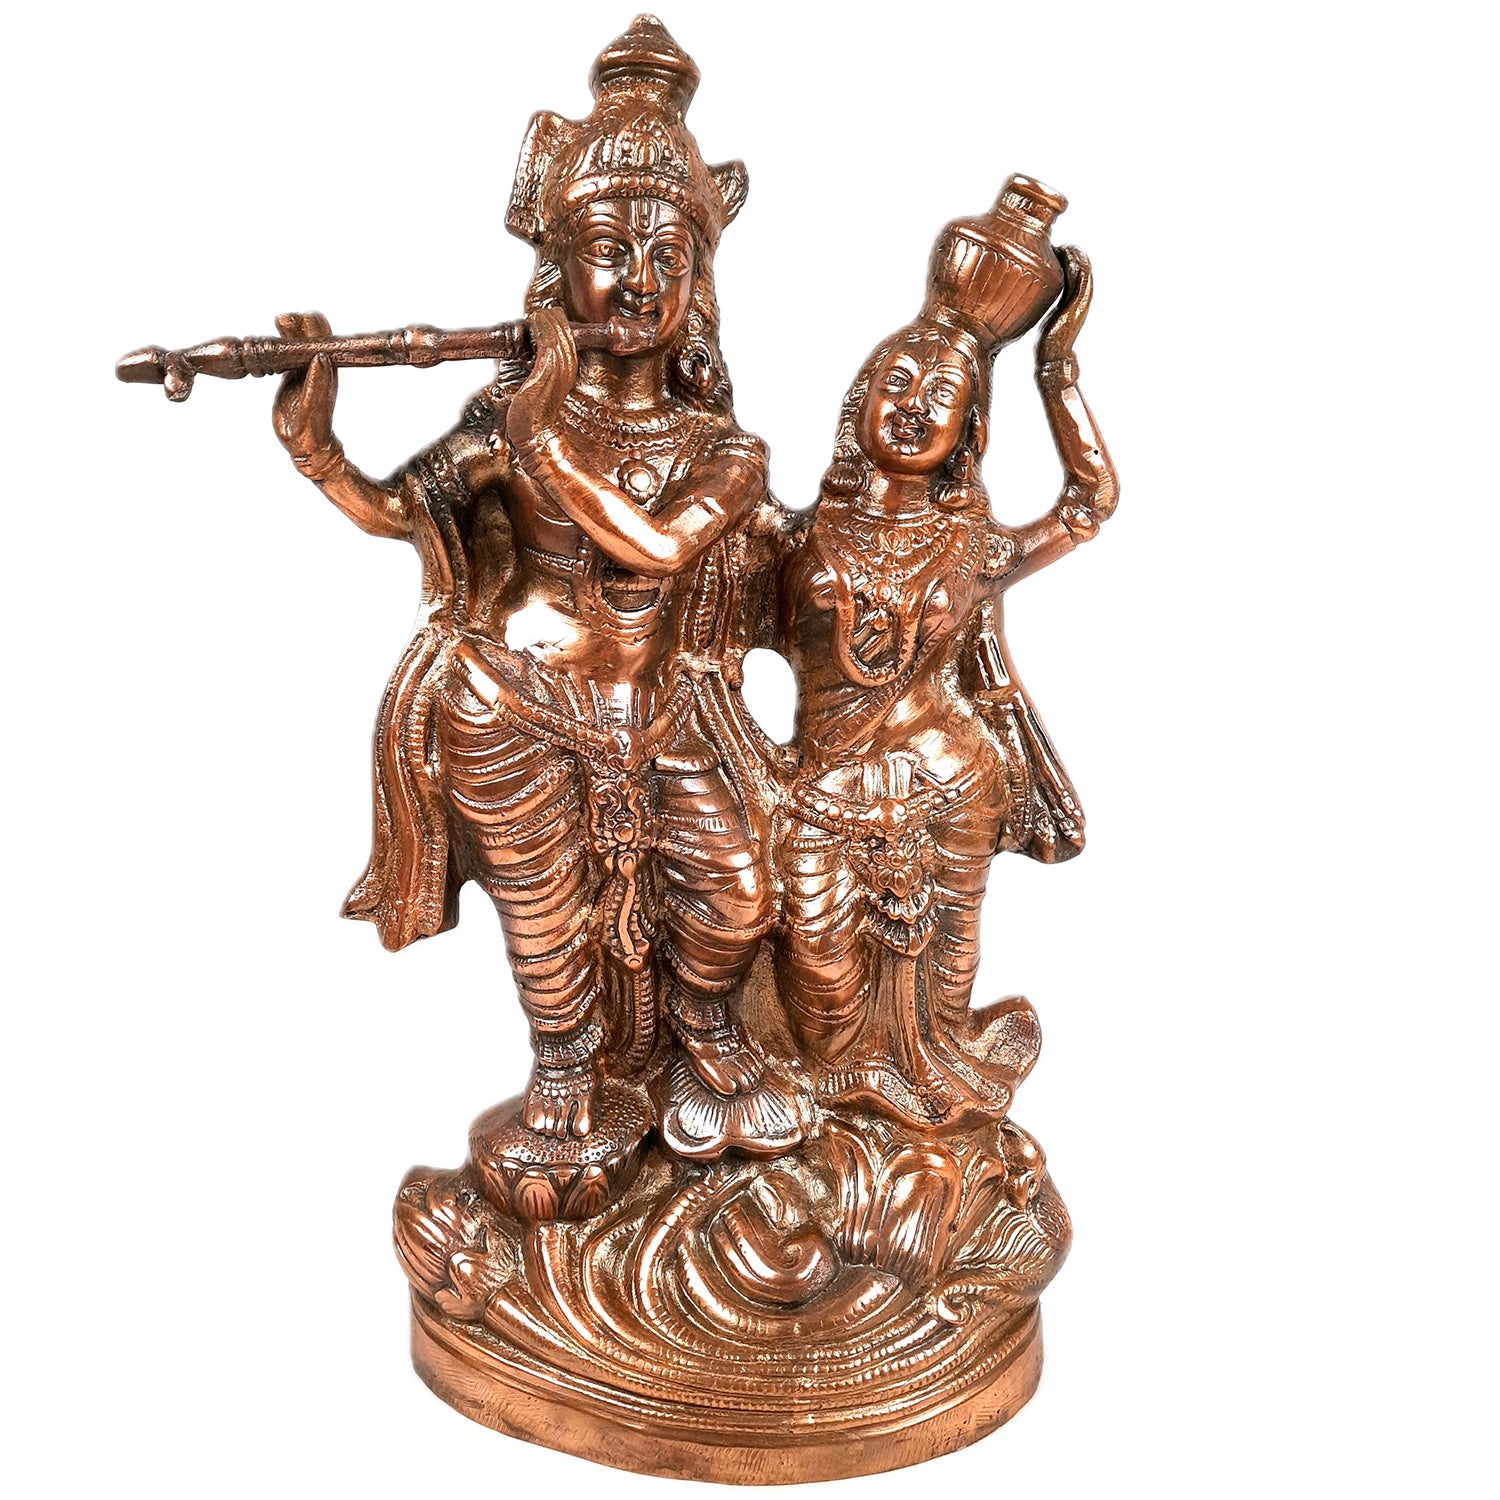 Radha Krishna Idol Statue | Radhe Krishna Murti For Corner Decoration | Wedding Gift for Couples | Religious Gift - for Home, Table, Living Room, Office, Puja , Entrance Decoration - 18 Inch - Apkamart